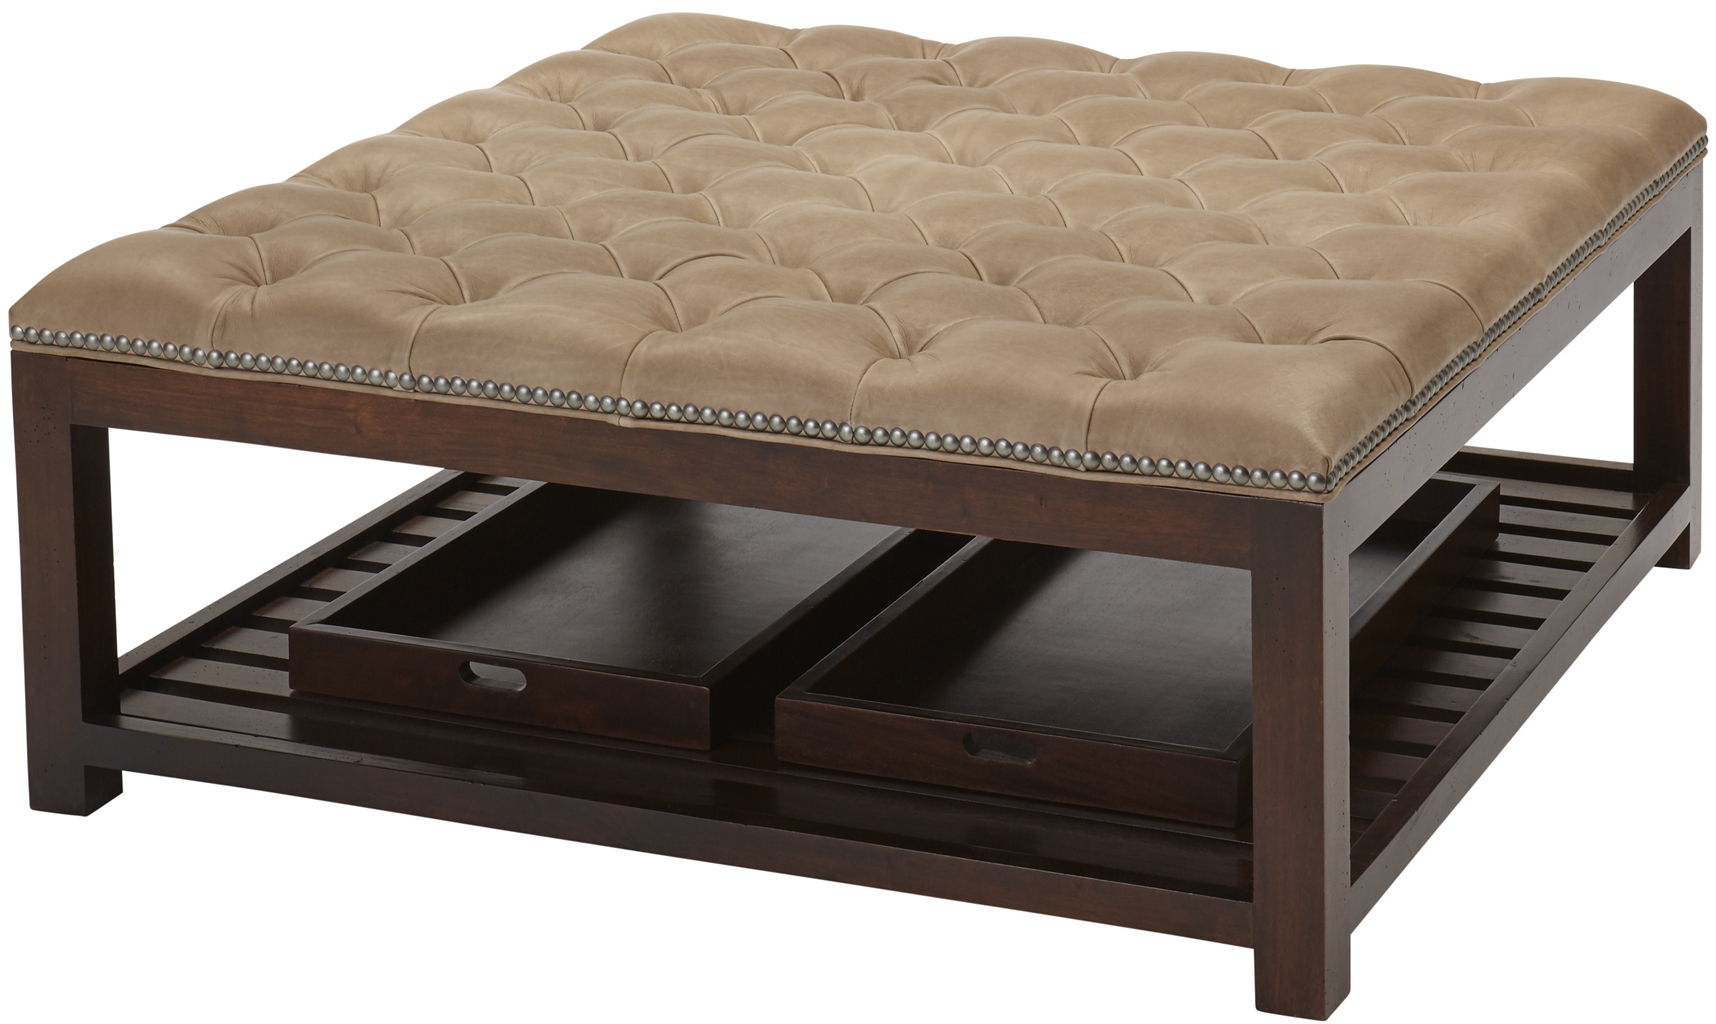 Luxury Leather & Upholstered Furniture Tufted Ottoman Bench